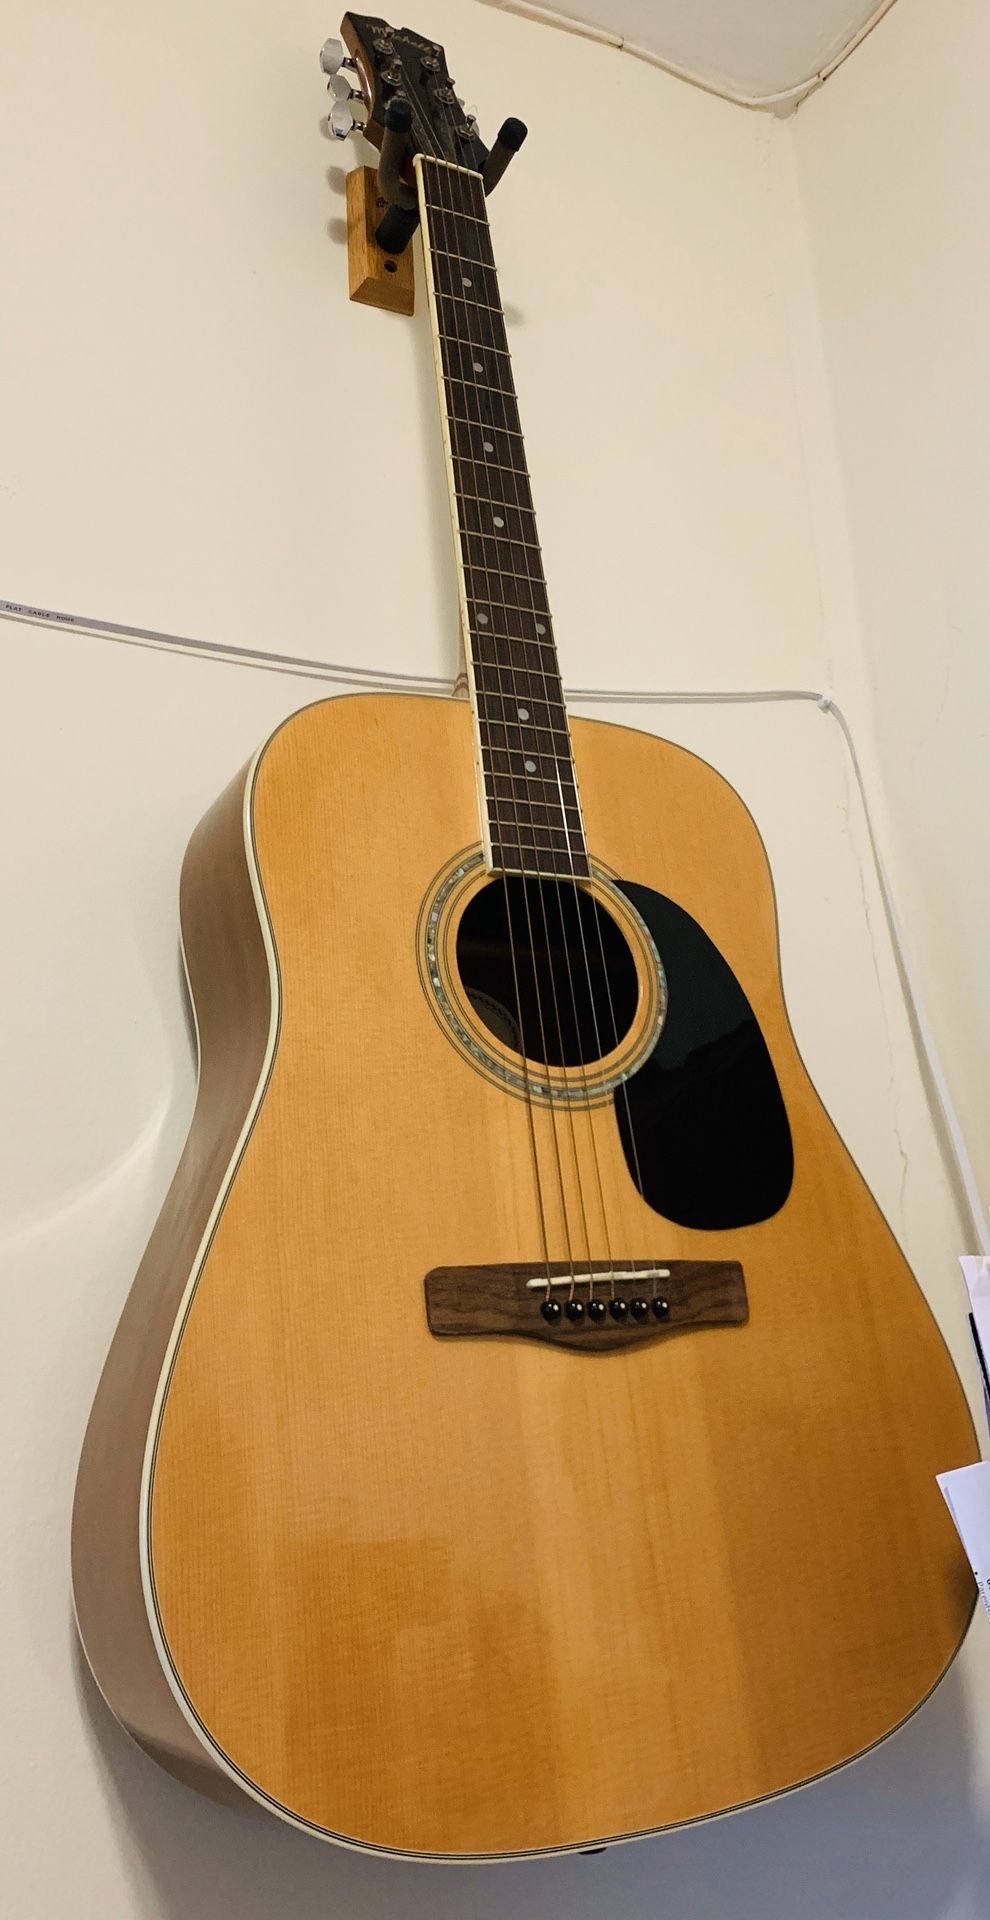 Mitchell acoustic guitar